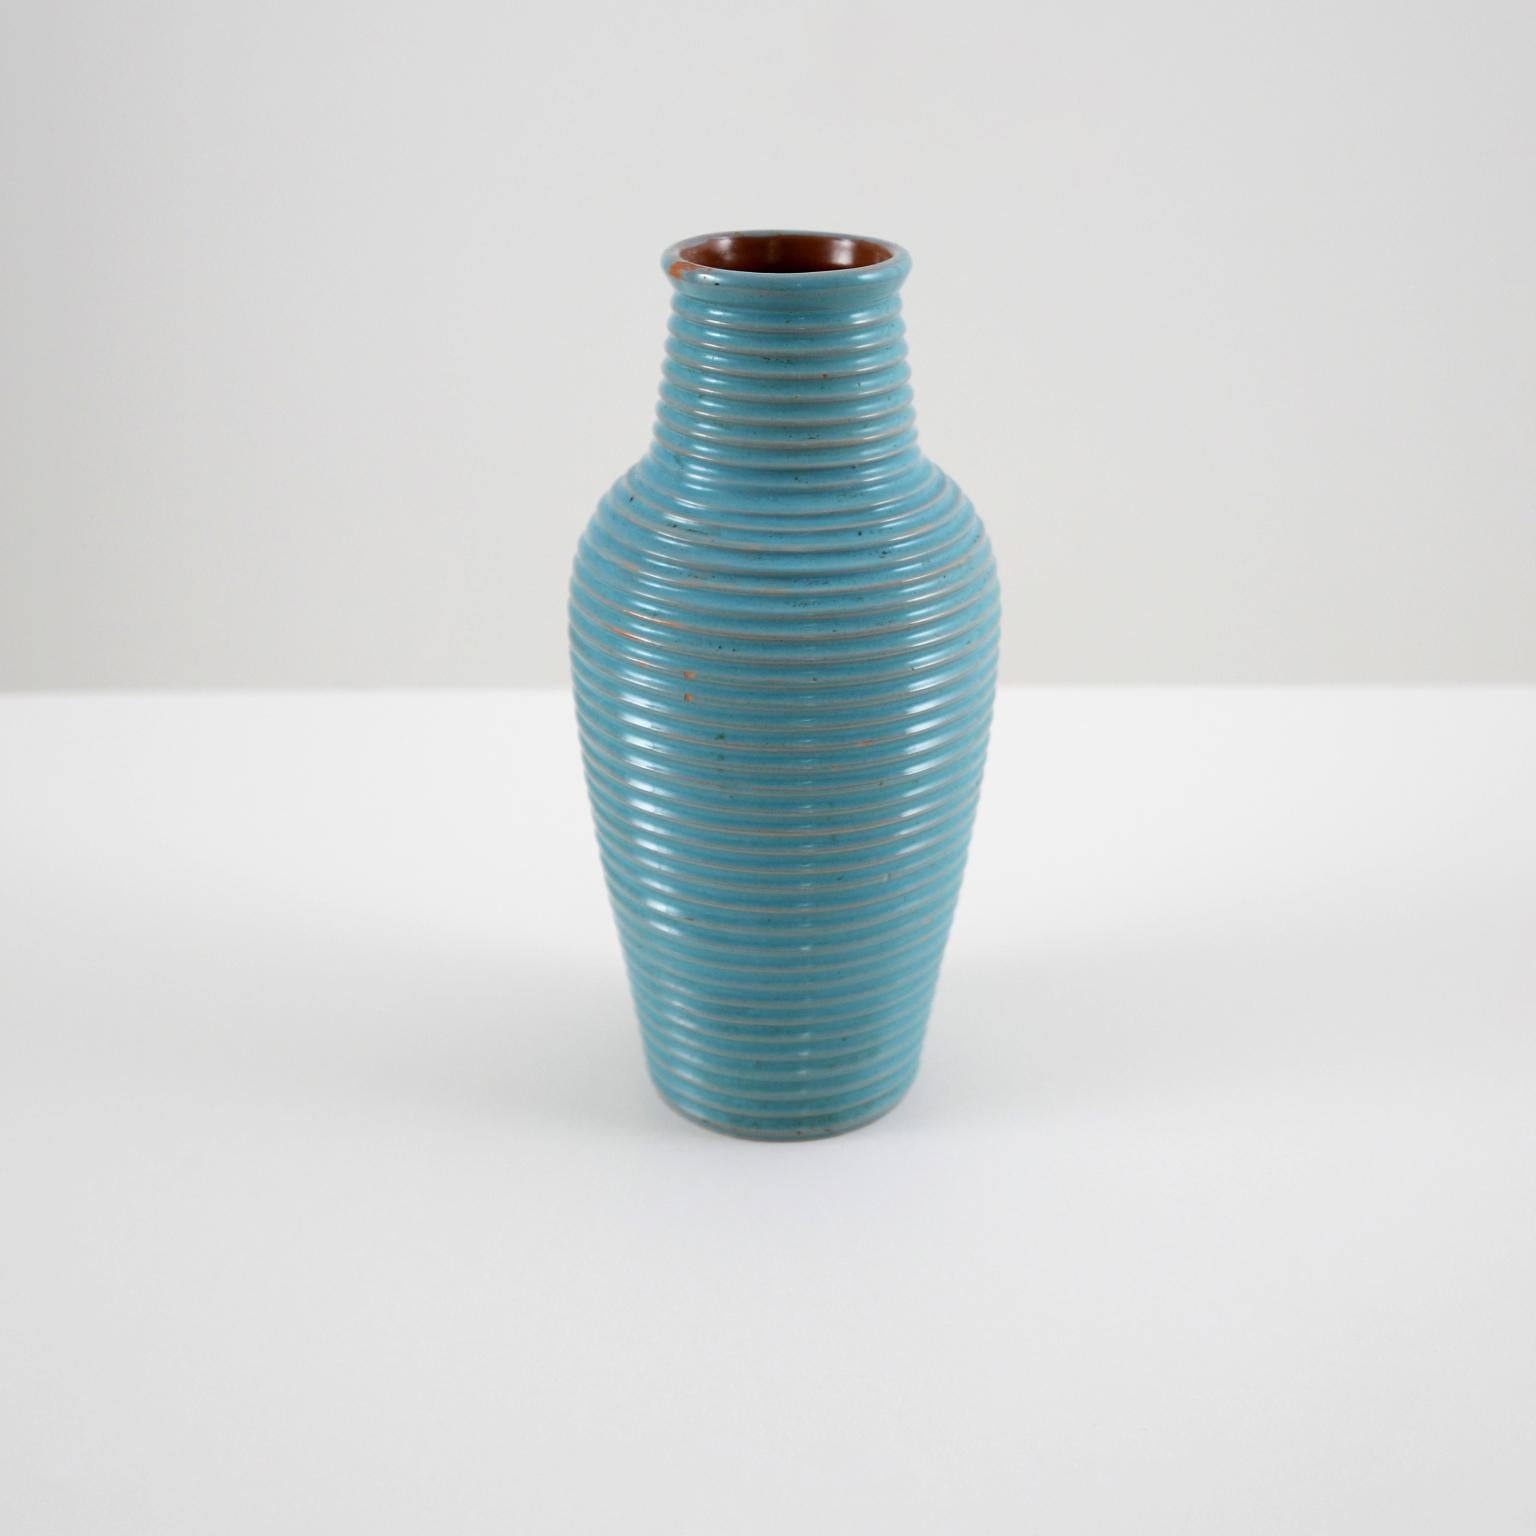 Original Bauhaus ceramic vase with horizontal grooves decor and glaze in cyan tone, Germany, 1930. Monogrammed W on the base.